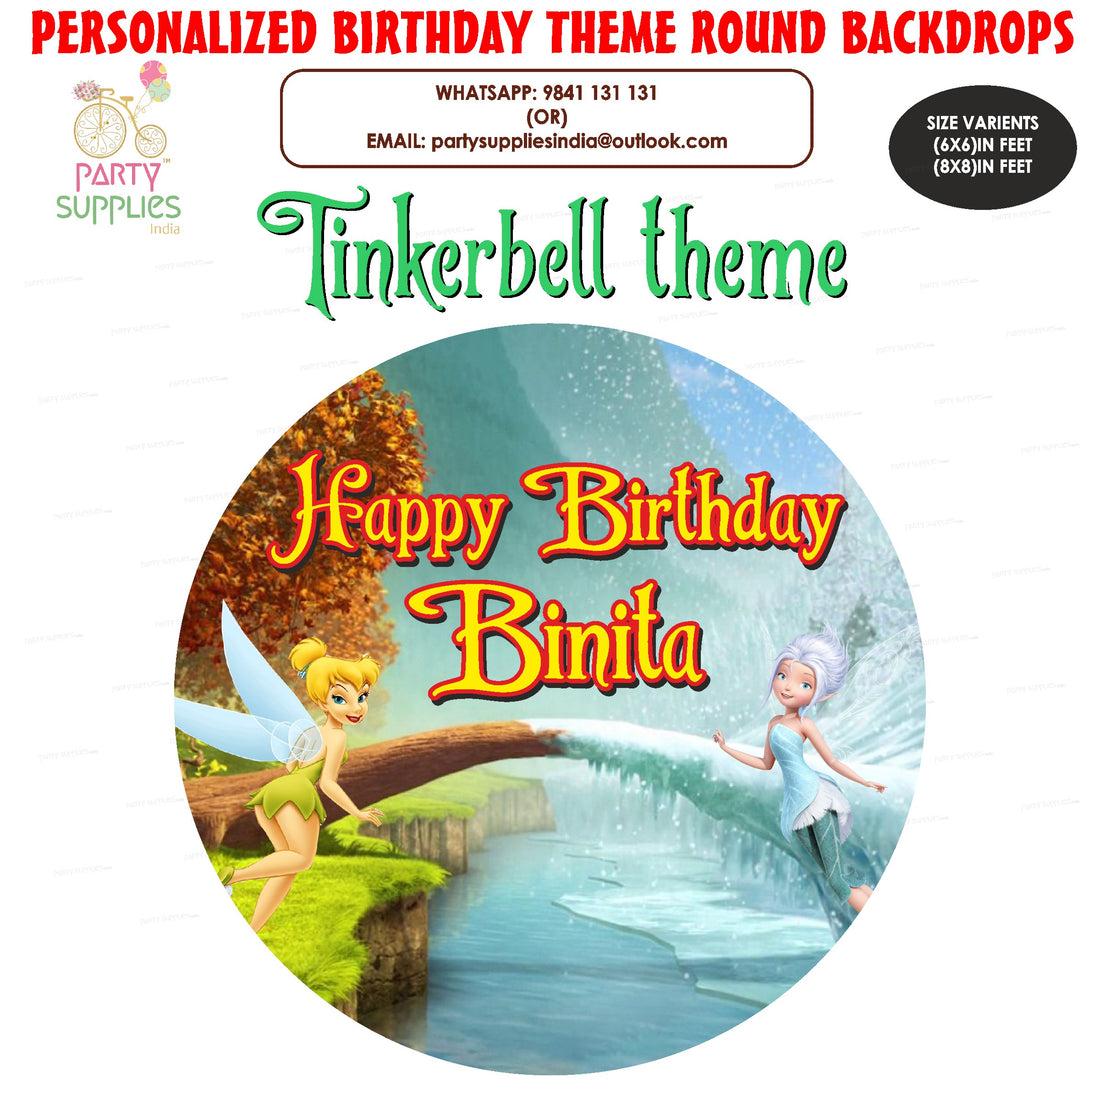 PSI Tinker Bell Theme Customized Round Backdrop